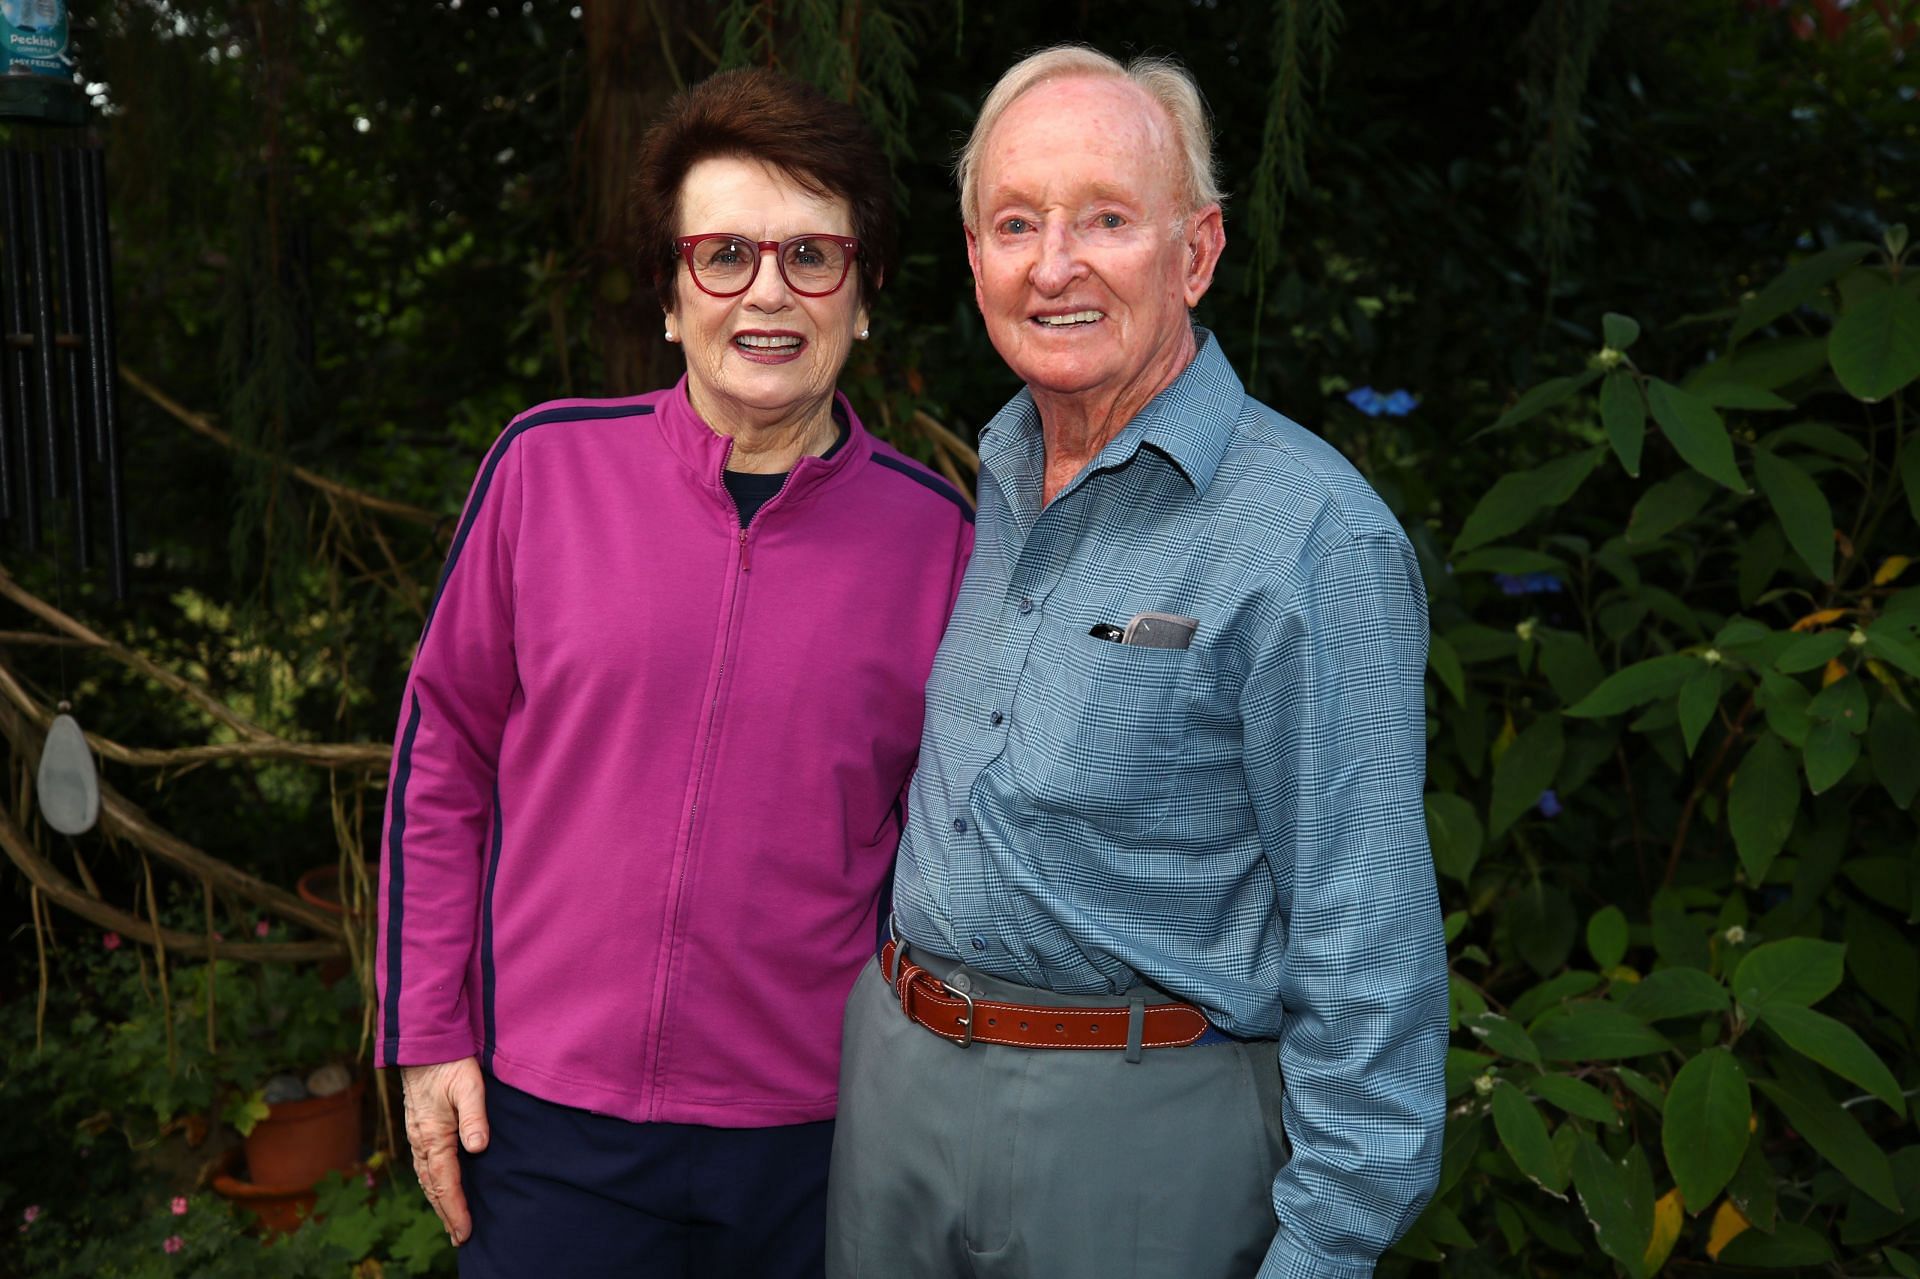 Billie Jean King and Rod Laver at The Championships - Wimbledon 2018.